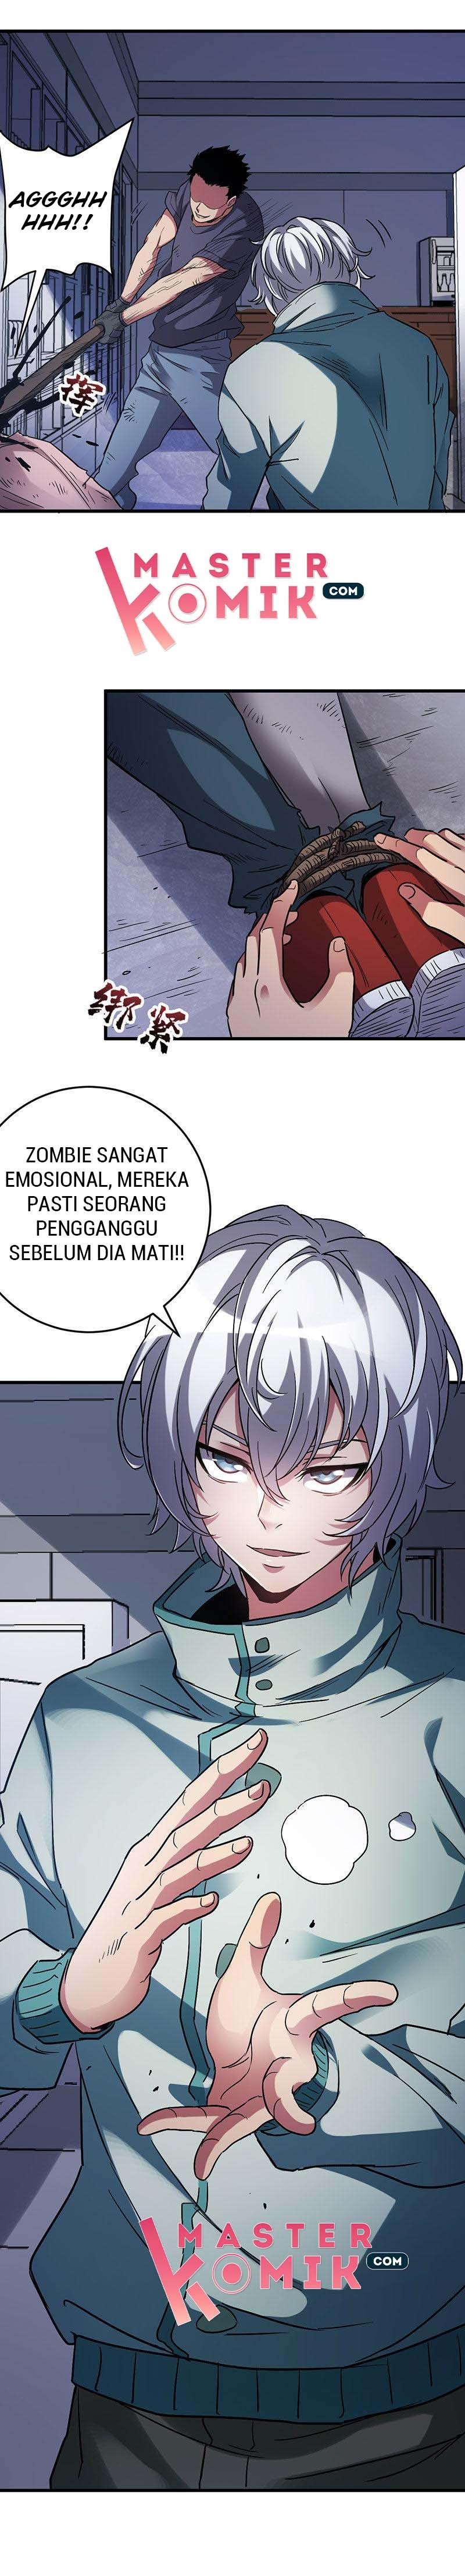 Strongest Evolution Of Zombie Chapter 08